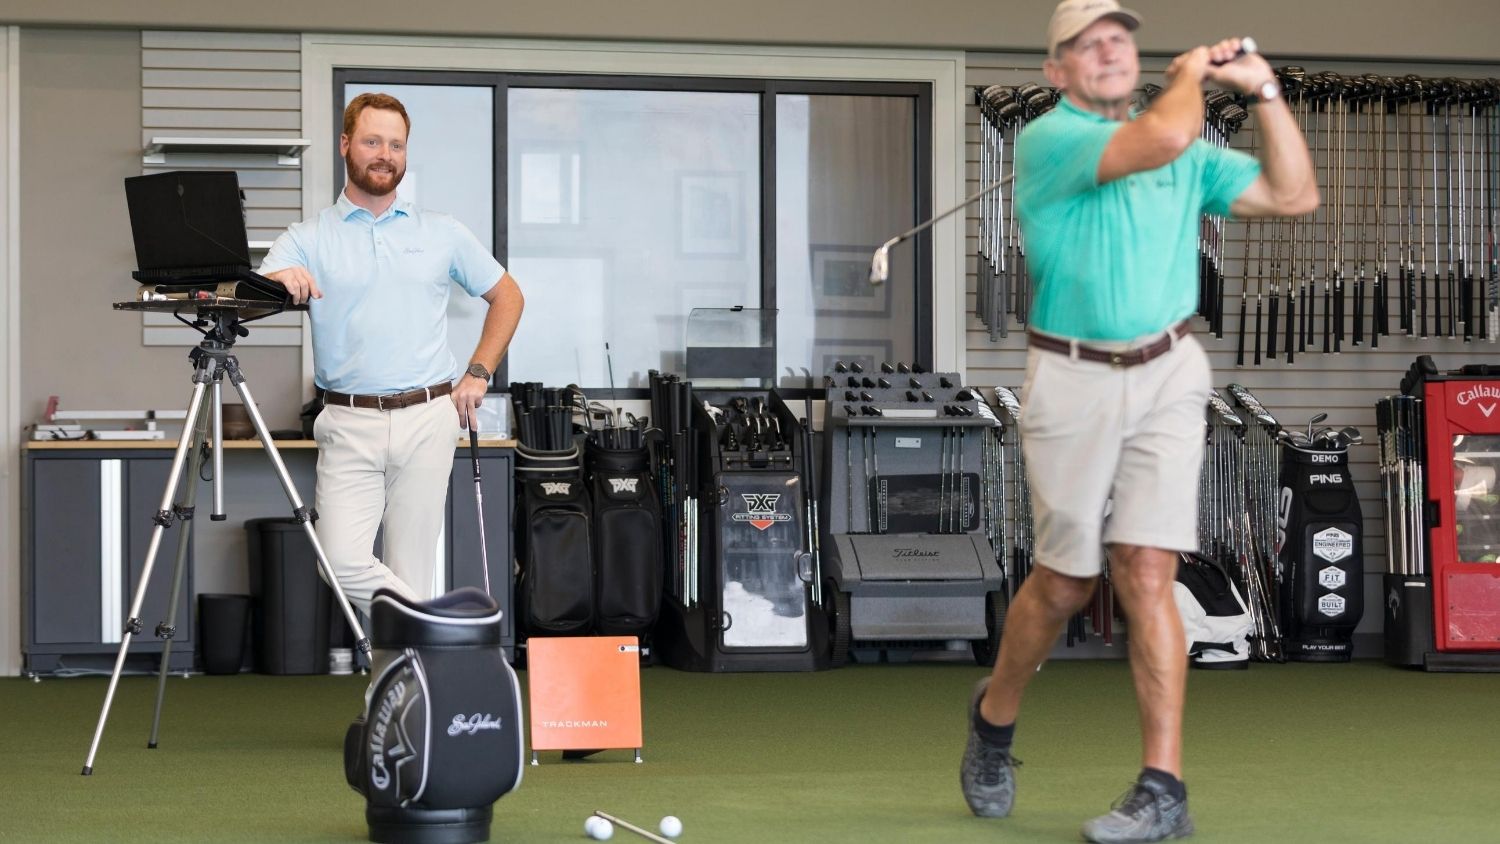 Tee Time: A Conversation with a Golf Club Fitter, College of Natural Resources, Ben Freundt fitting a club - feature